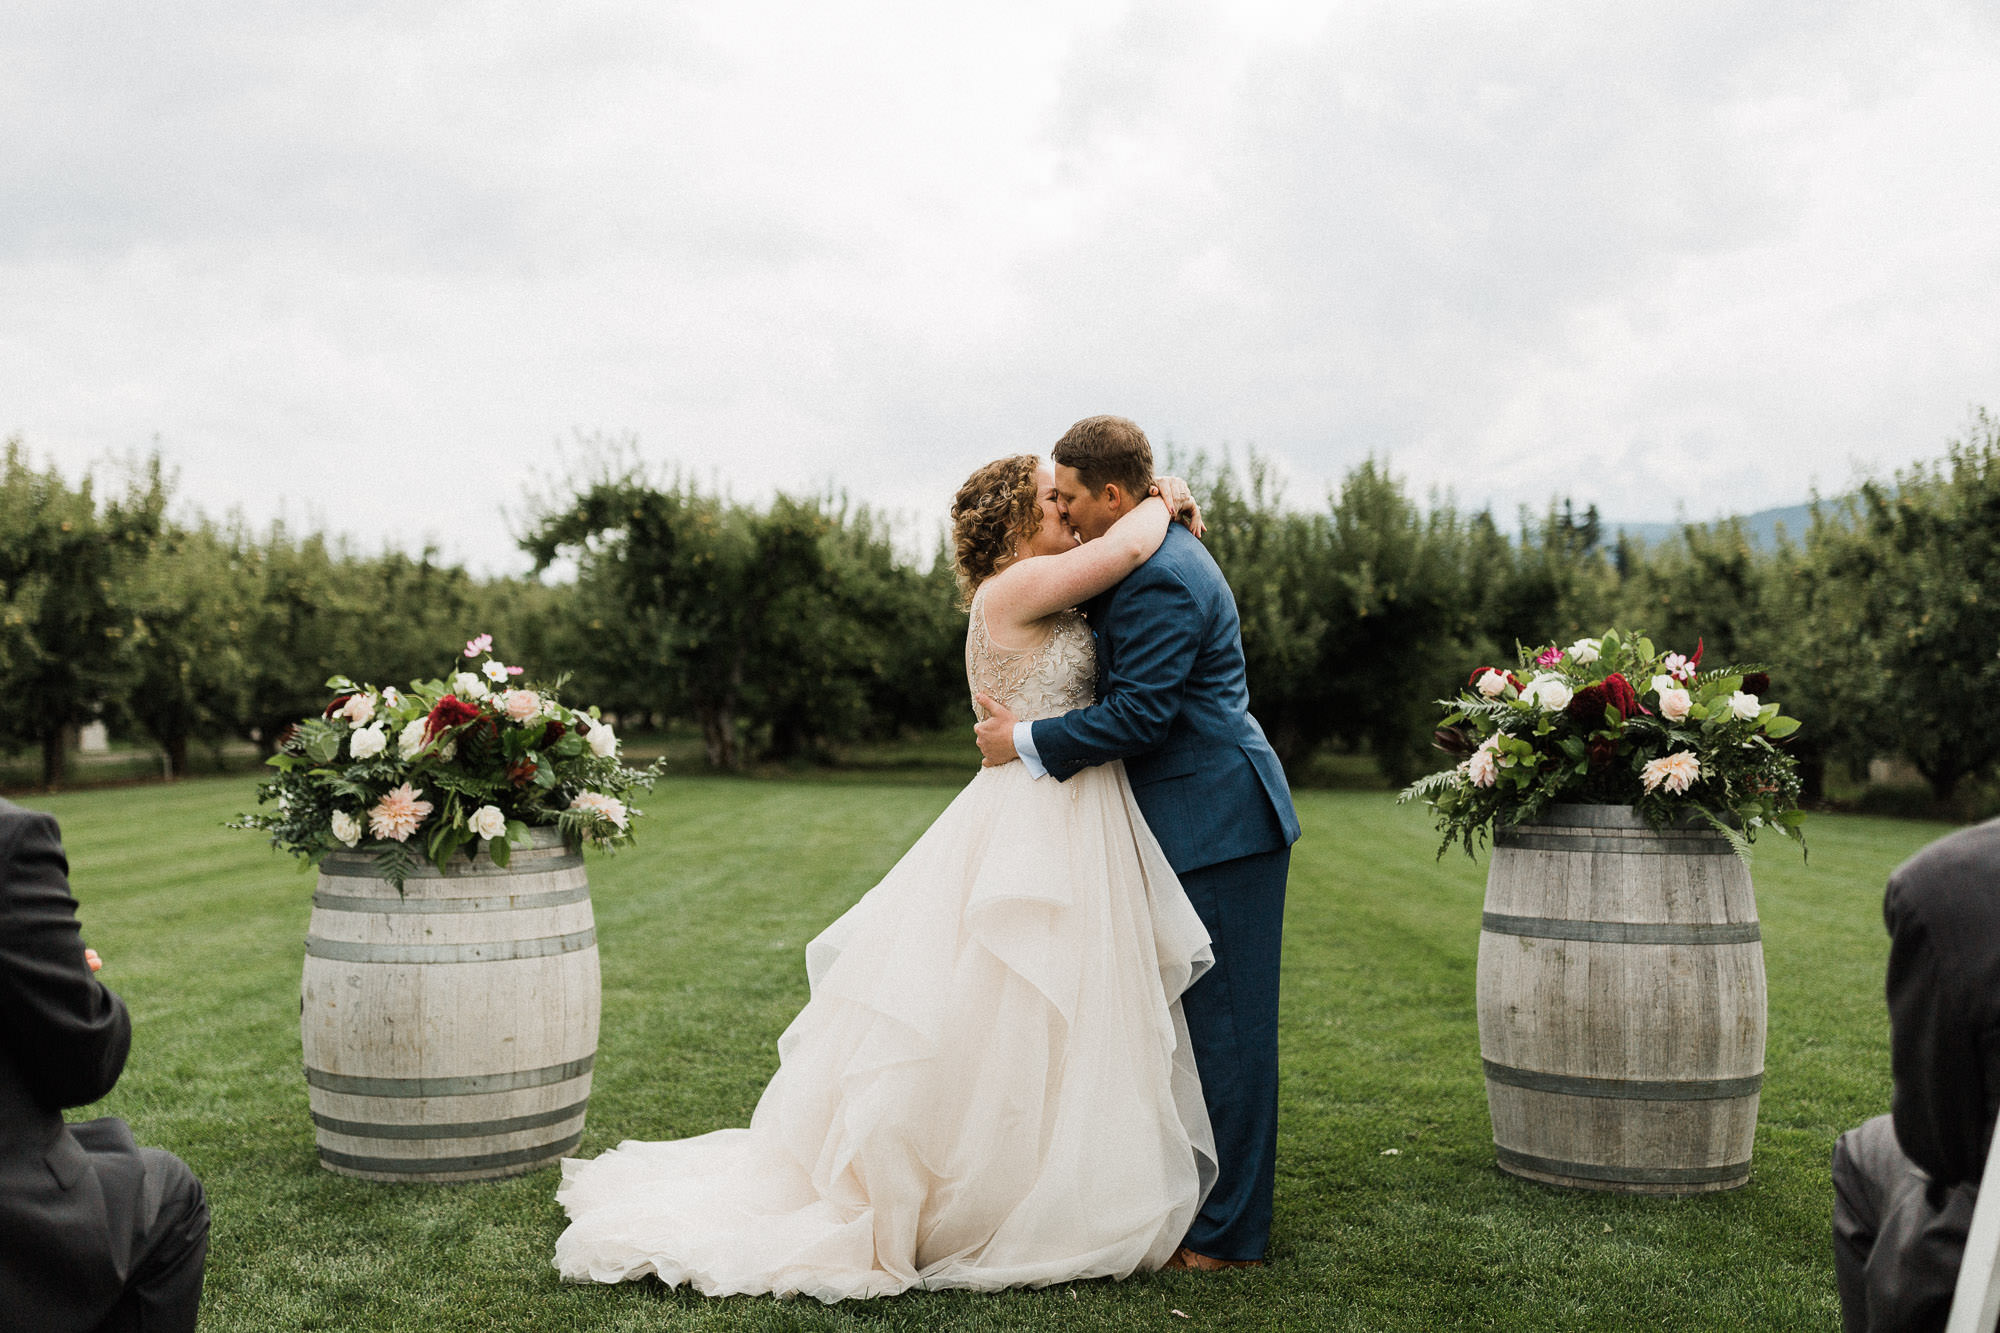 The bride and groom share their first kiss at Mt. View Orchards.